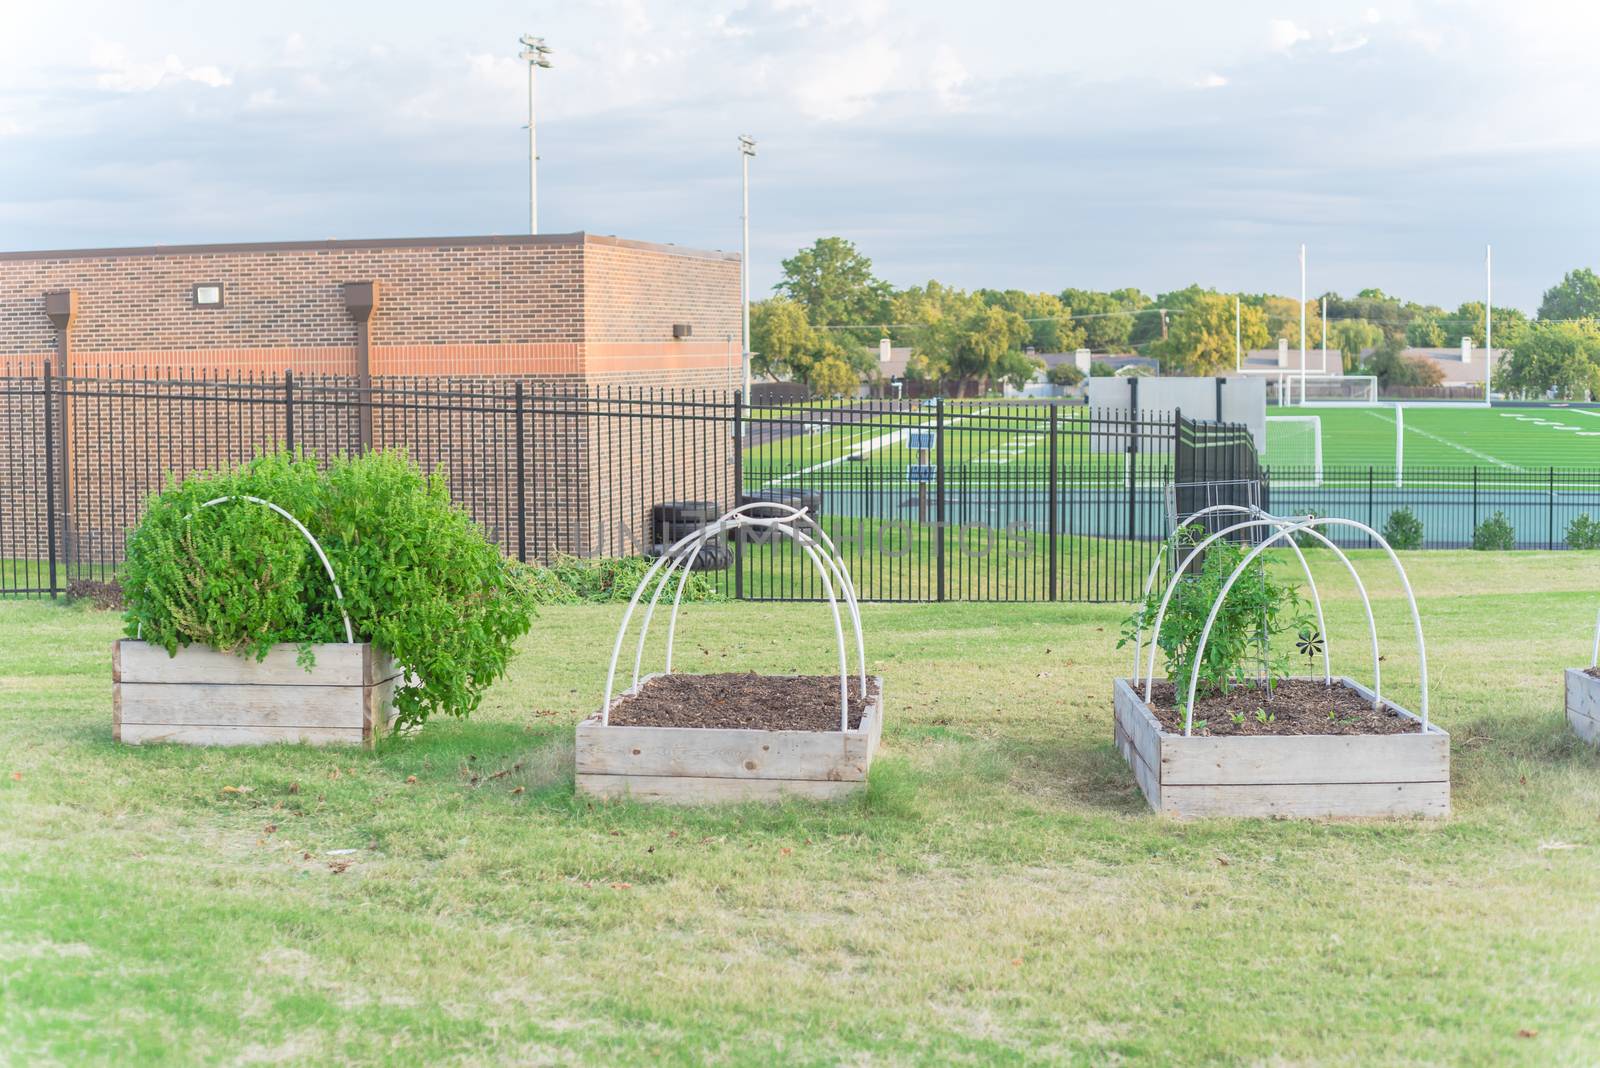 Row of raised bed garden with PVC pipe for cold frame support at elementary school near Dallas, Texas, America. School building with football field in background